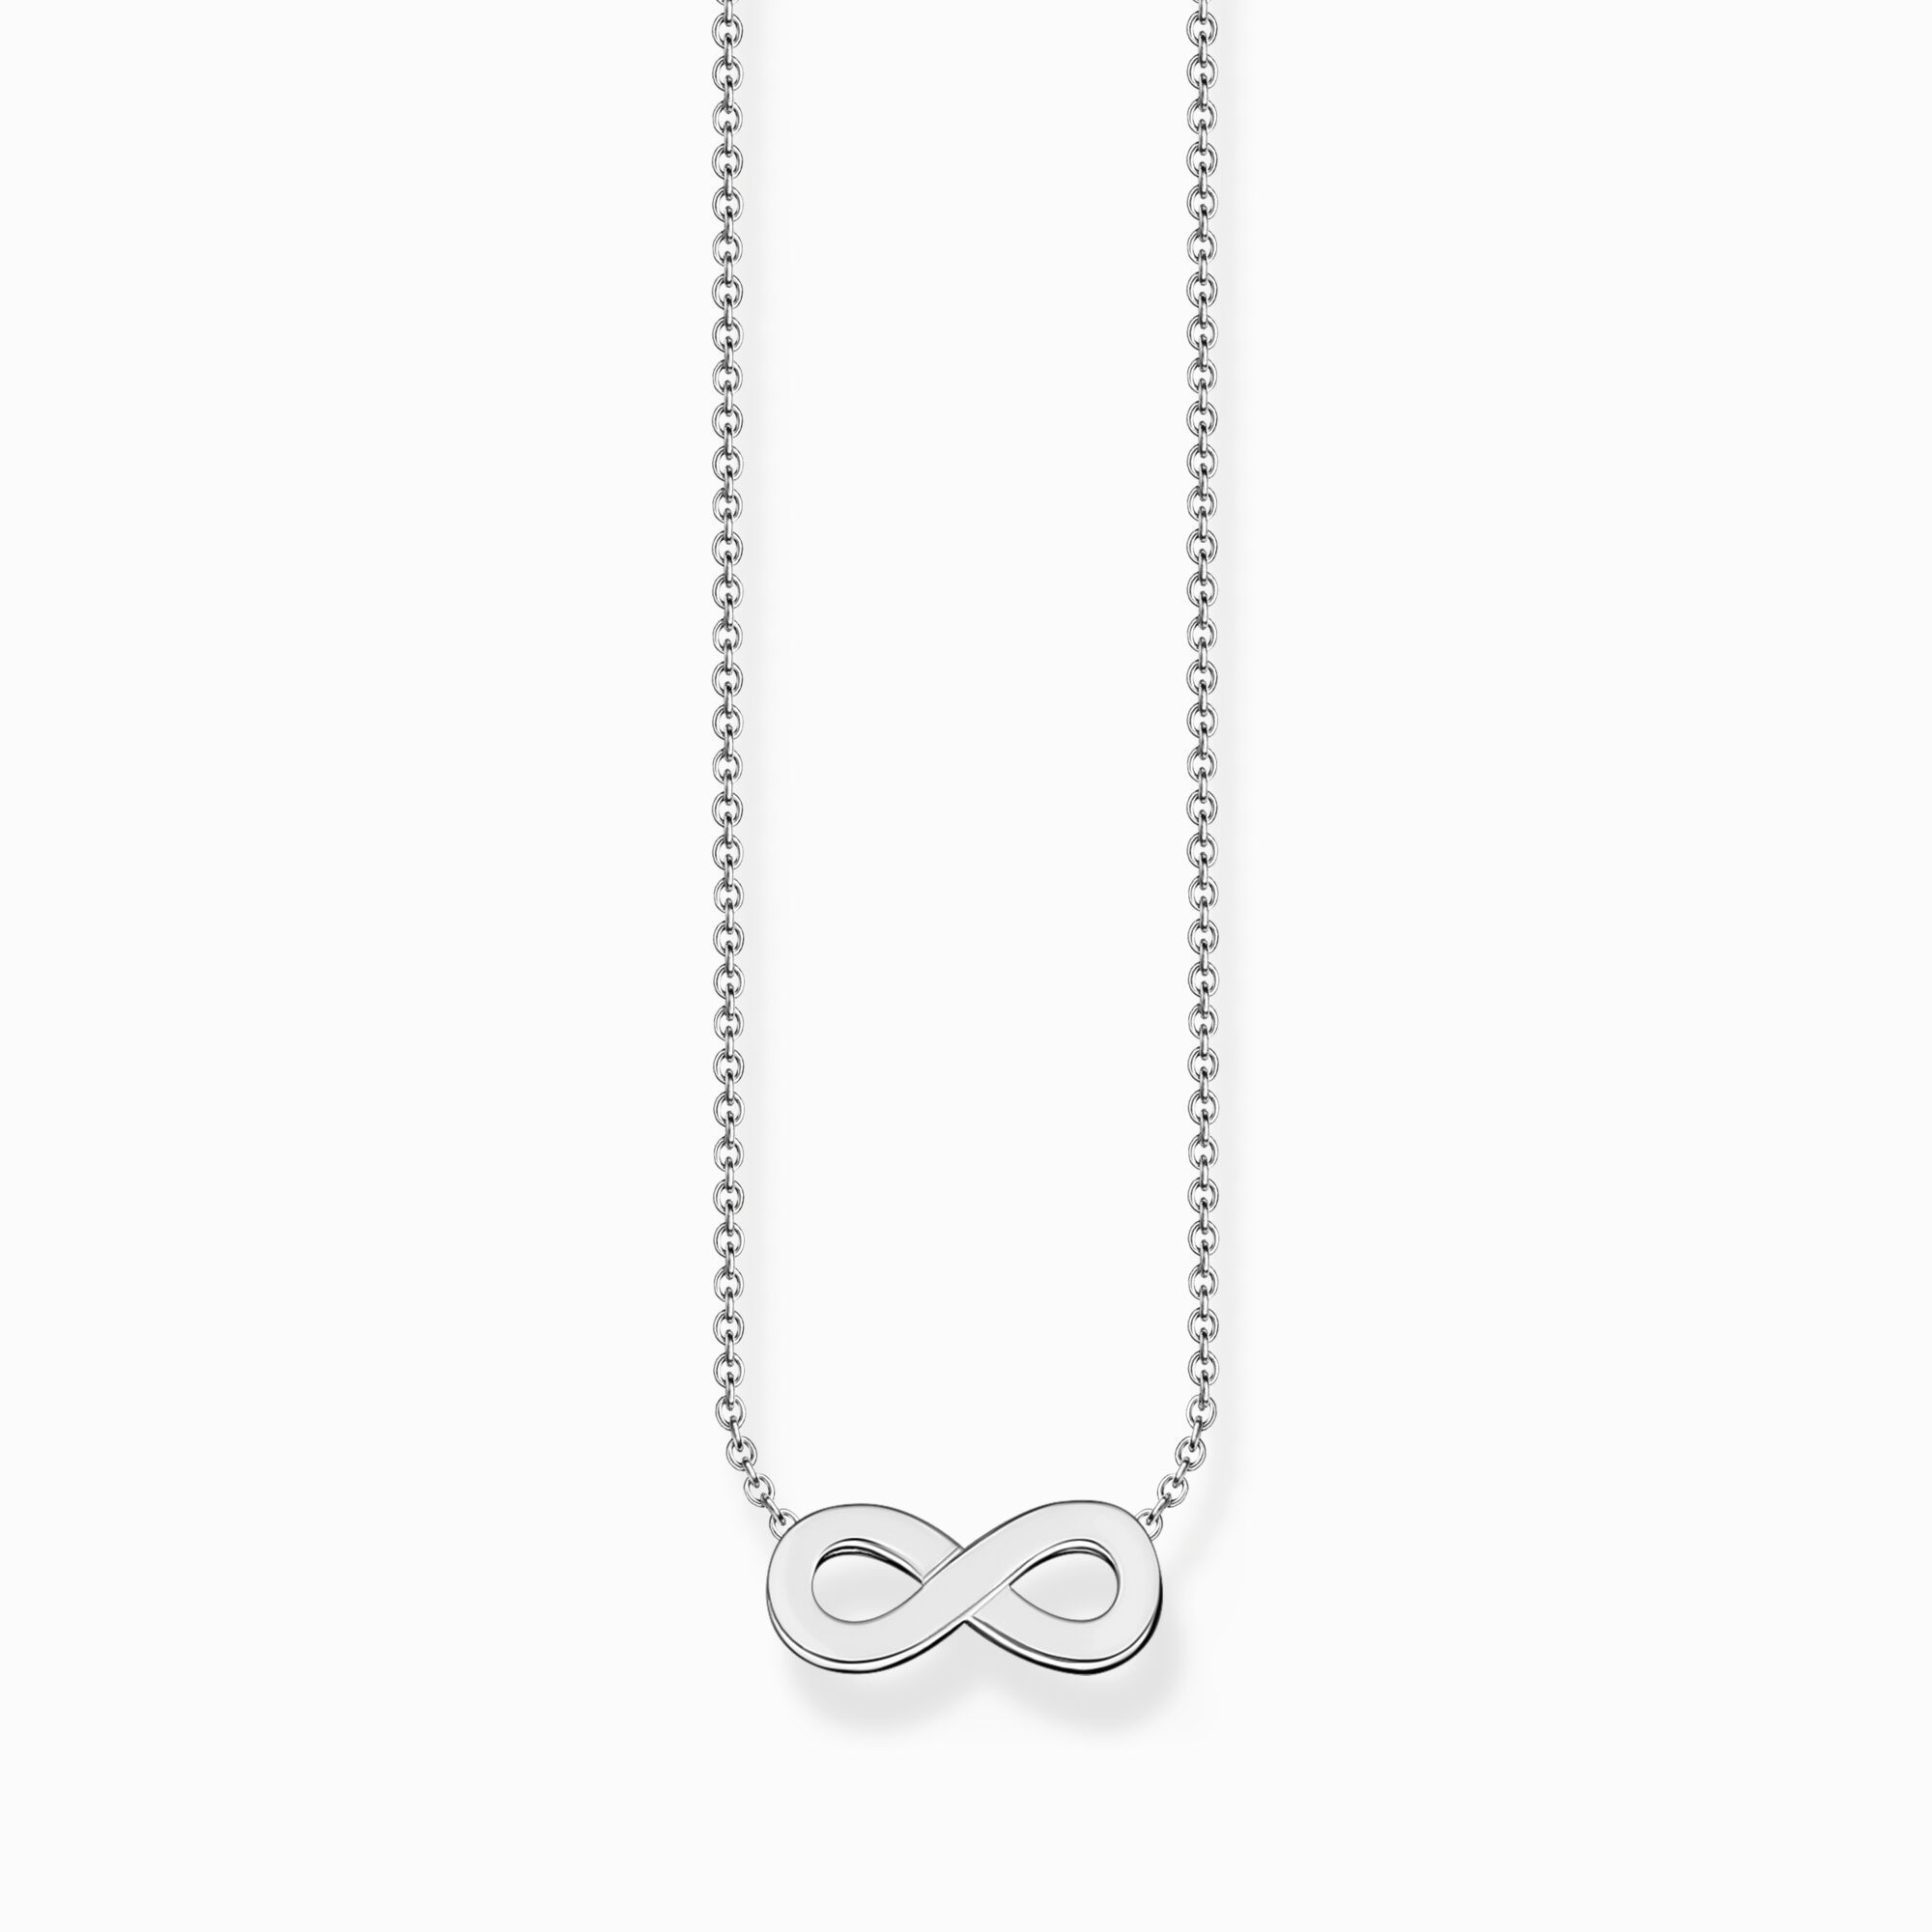 Silver necklace with infinity pendant from the Charming Collection collection in the THOMAS SABO online store